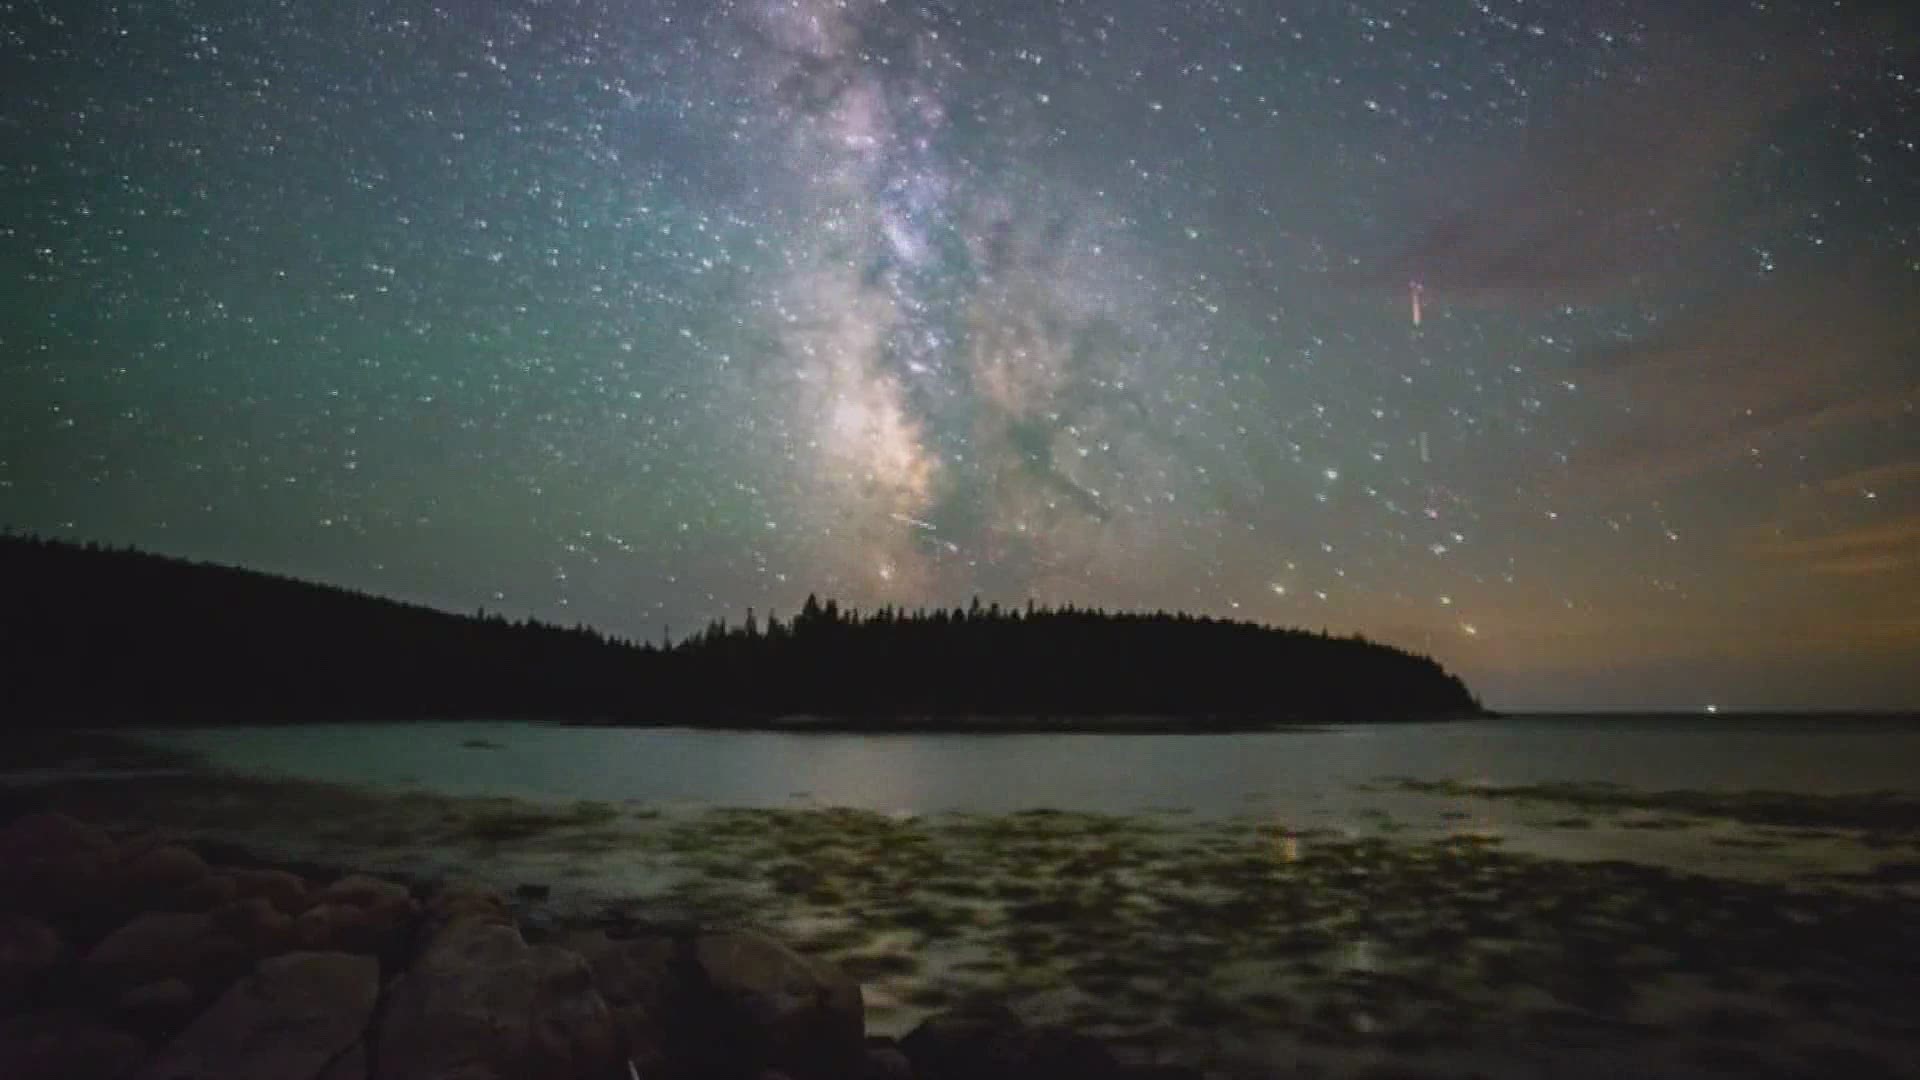 Maine photographer Will Greene put together a timelaspe shot in parts of Acadia National Park